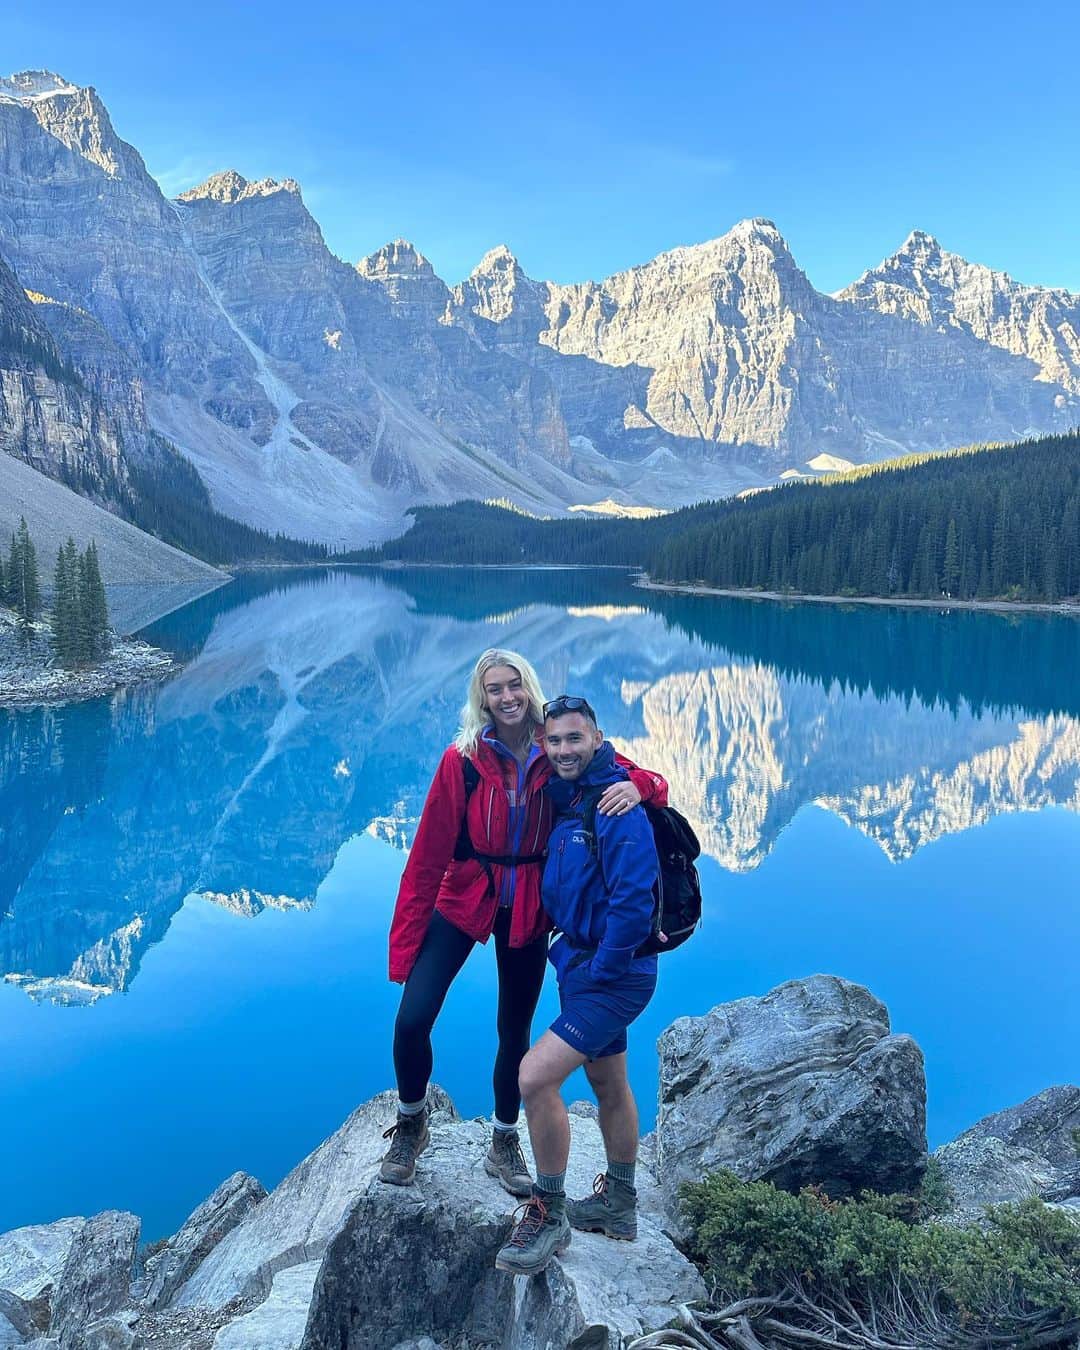 Zanna Van Dijkさんのインスタグラム写真 - (Zanna Van DijkInstagram)「Banff Photo Dump + TIPS 🇨🇦   Hit SAVE + TAG your adventure buddy! ⛰️   We couldn’t visit Canada and not experience the iconic landscapes and lakes of Banff national park. It’s definitely a more popular destination and for good reason - it is STUNNING! 🤩   🥾 Hike: I highly recommend exploring the trails around the main attractions (like Lake Louise/Moraine) as you’ll often get better views and escape the crowds. Here are some of our favourite routes: ➡️ Little Beehive Lookout (above Lake Louise) ➡️ Eiffel Lake (from Lake Moraine)  ➡️ Cirque Peak via Helen Lake (our favourite hike, very spicy & scrambly)  🧗‍♀️ Climb: If you want to try via ferrata for the first time, check out the Mount Norquay route on the peaks above Banff. You get a guide & it’s perfect for beginners!  🌊 Swim: We swam every day, our favourite spots for a dip included: ➡️ Helen Lake  ➡️ Eiffel Lake  ➡️ Two Jack Lake  These three are not as glacial as many lakes in Banff, but still cold and refreshing.  🚗 Travel: You definitely need a car to get around and access many trailheads. Some great scenic roads include: ➡️ Icefields Parkway  ➡️ Bow Valley Parkway   🏨 Stay: We stayed at @basecampsuitesbanff. Each room has its own kitchenette, which is super useful when you’re prepping your own breakfasts & packed lunches every day.  LOTS more info will be in my full Banff travel guide on my website in a few weeks 🥰🇨🇦 #banff #banffnationalpark #banffcanada #banffalberta #banfflife #albertacanada #explorealberta #morainelake」9月24日 23時57分 - zannavandijk